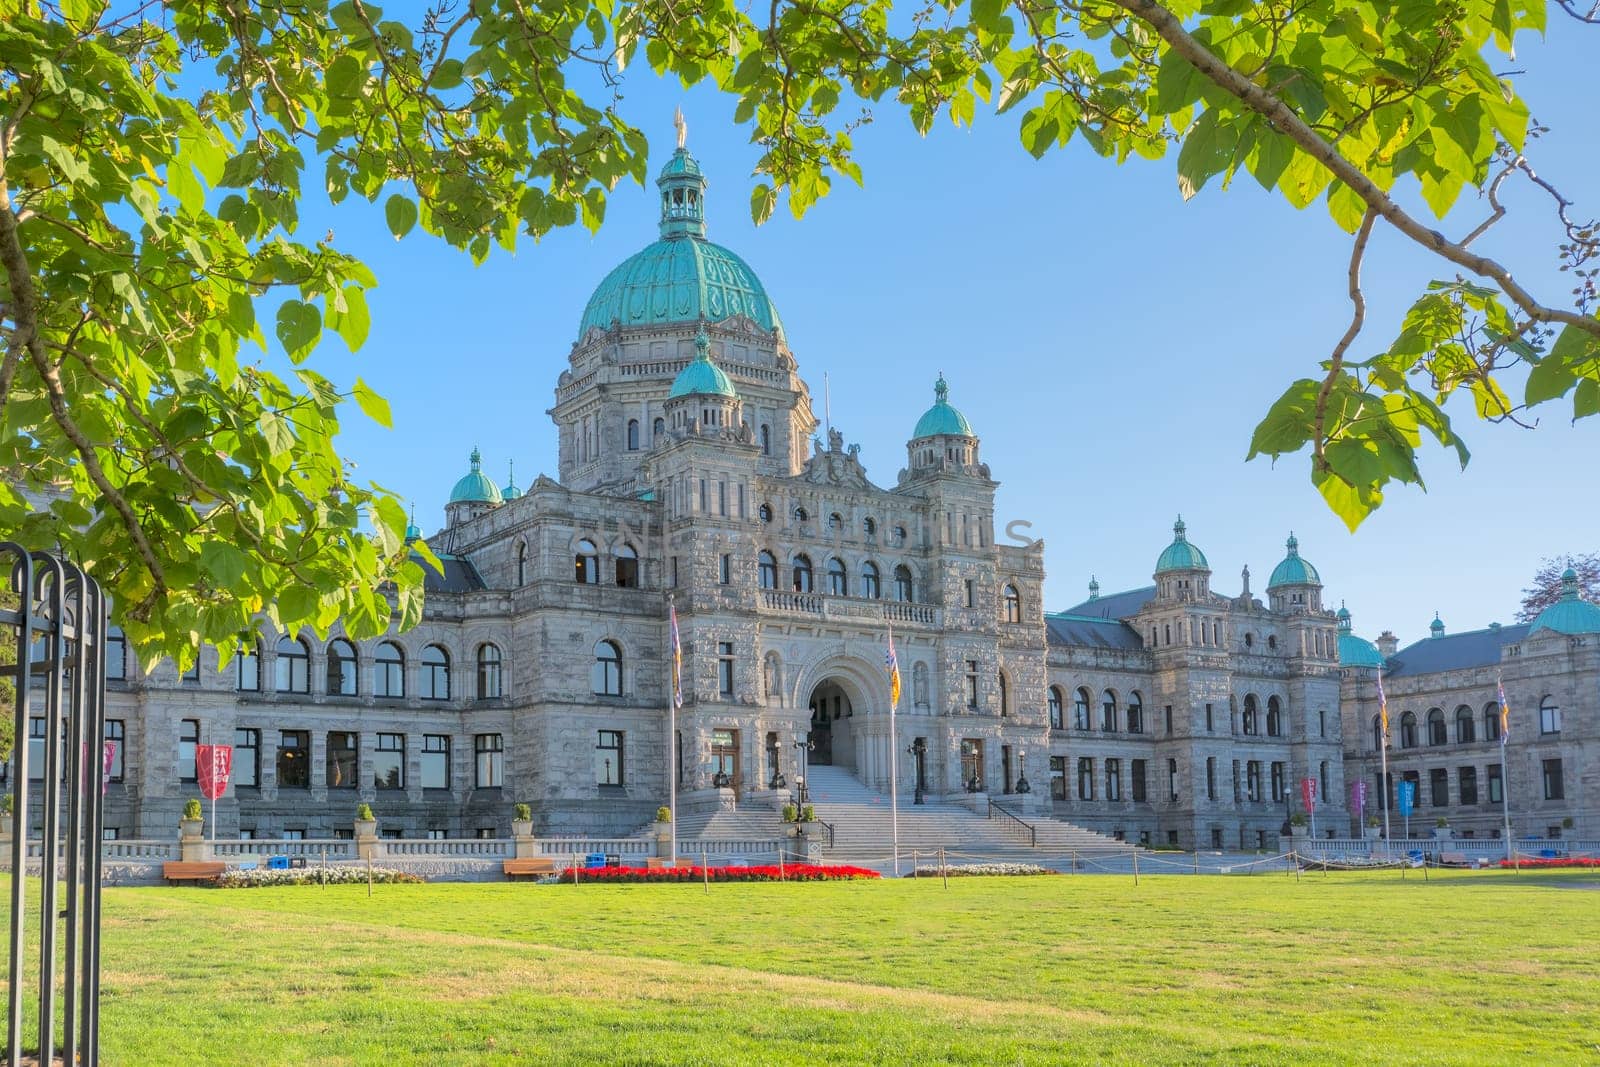 View of Legislative Assembly building in Victoria, British Columbia, Canada by Imagenet